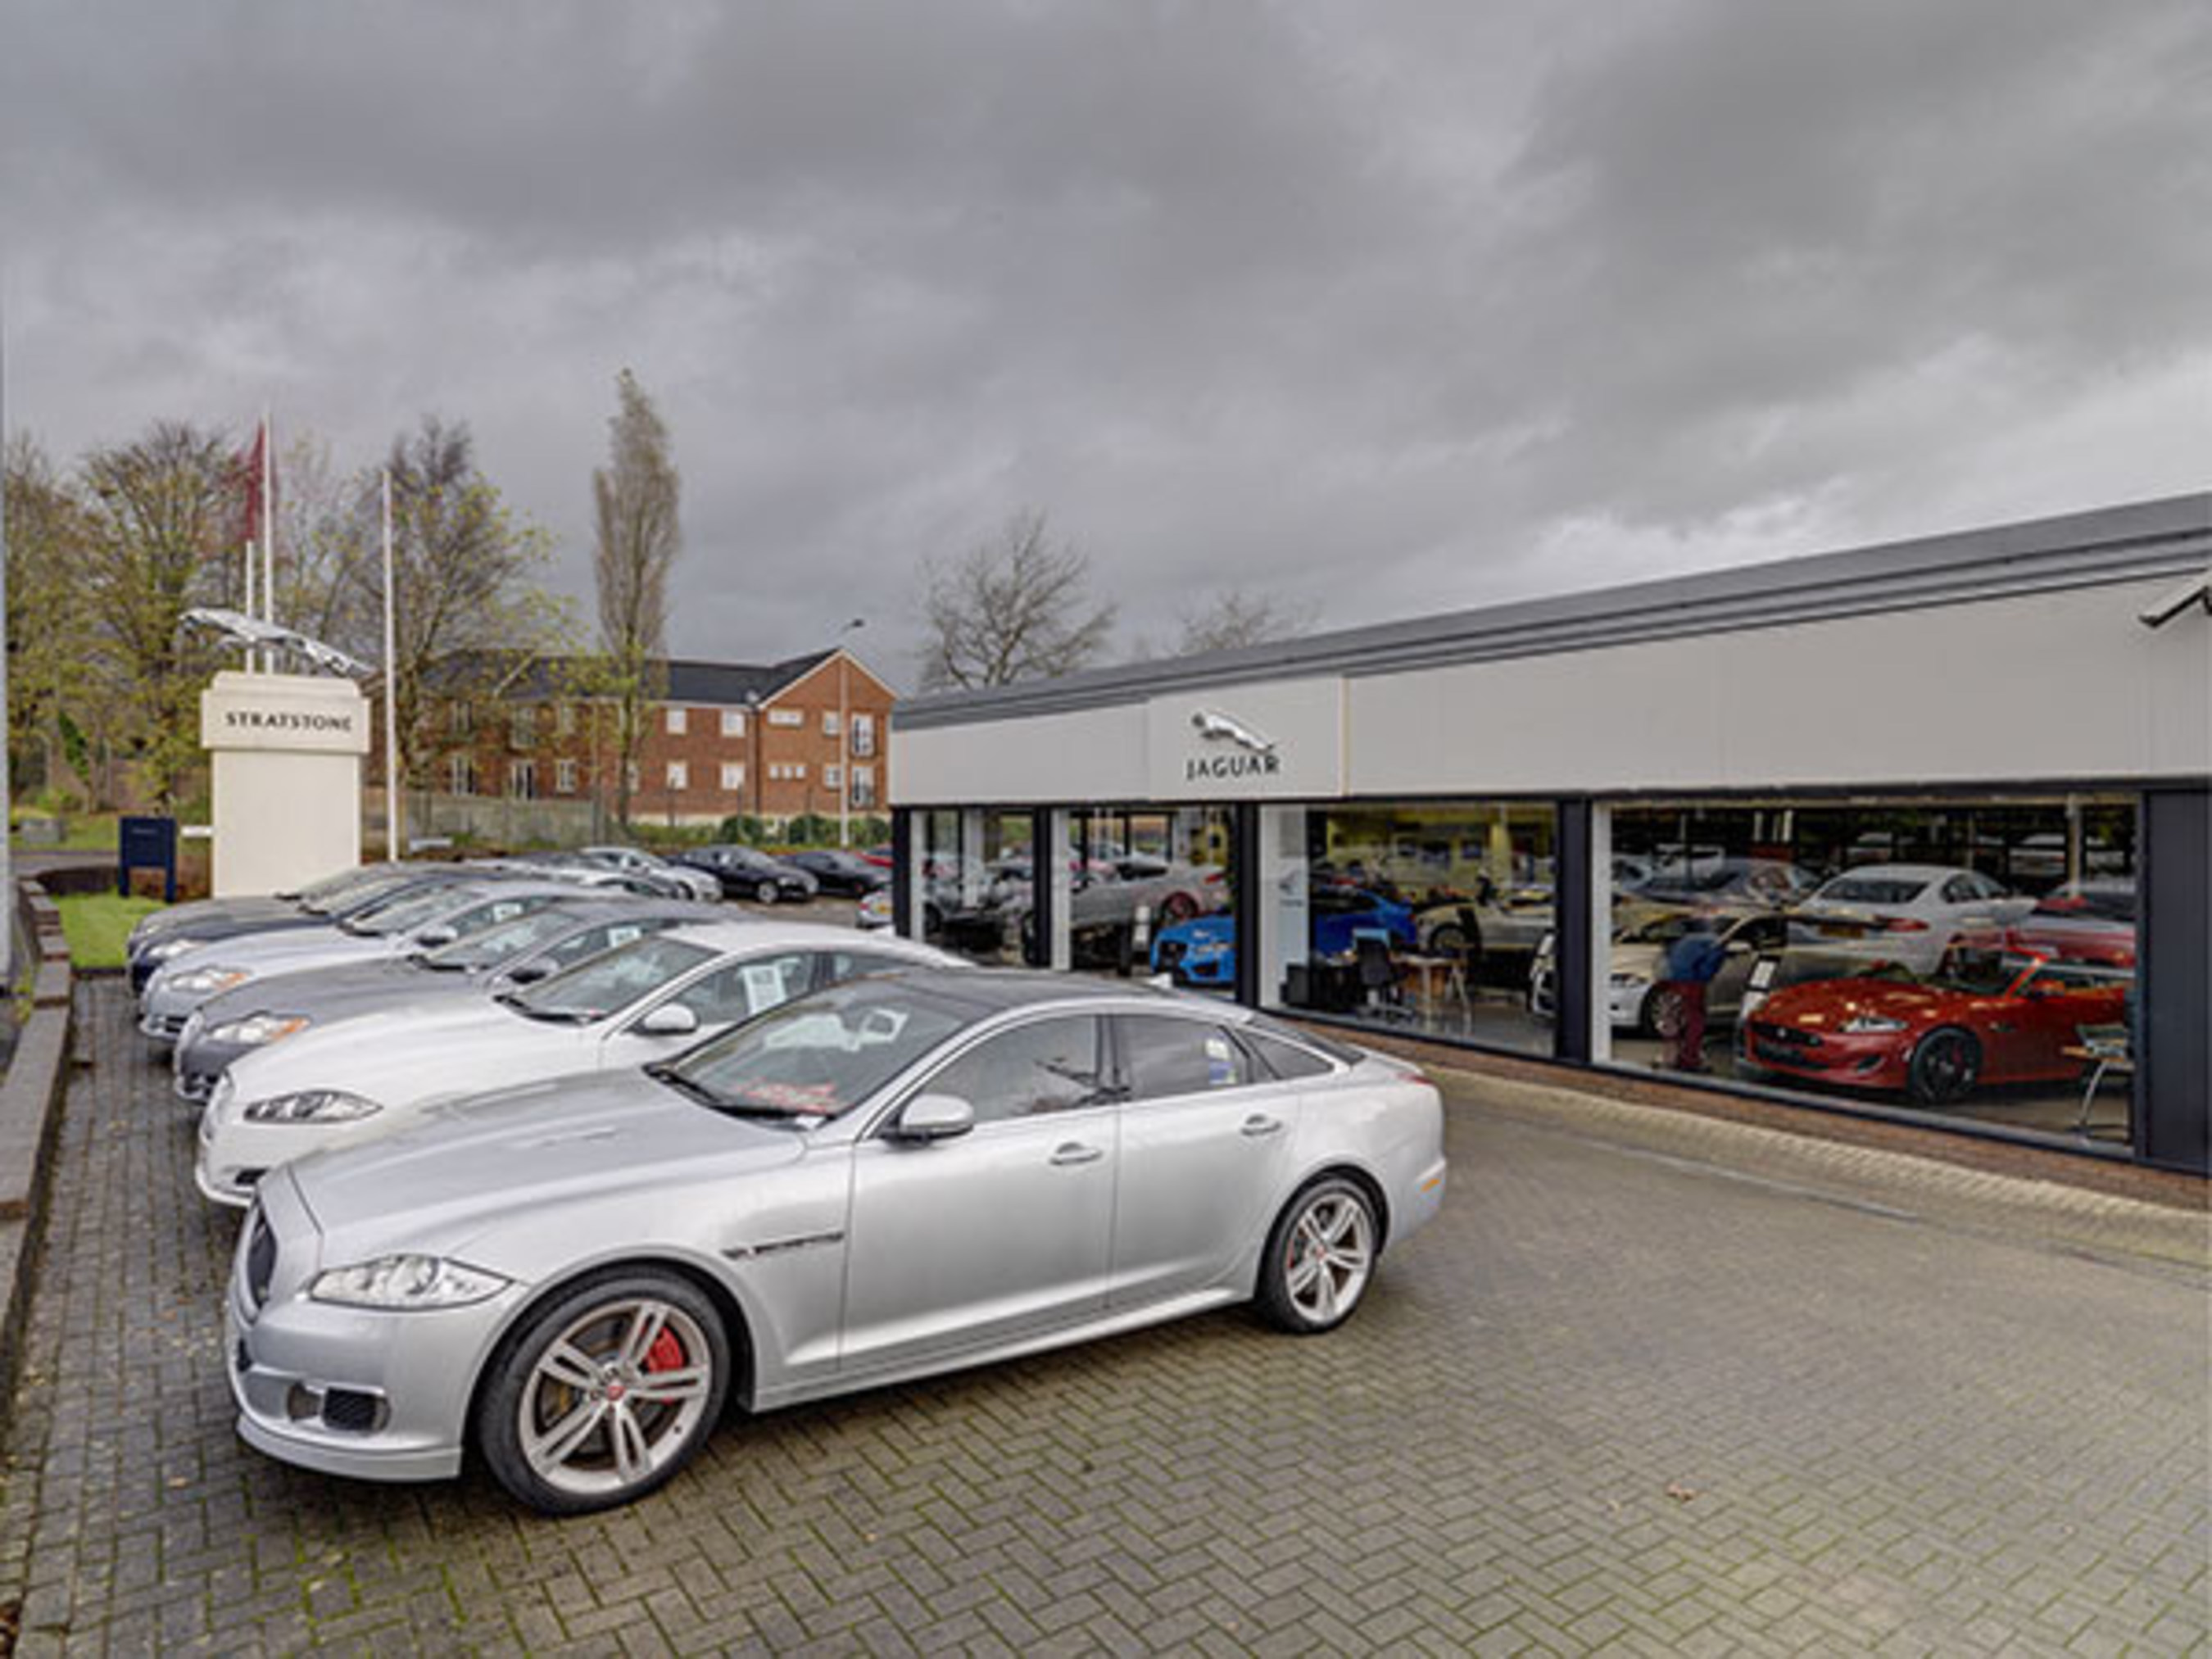 W. P. Carey Inc. has acquired a portfolio of 73 automotive retail facilities net leased to Pendragon plc, the largest automotive dealer in the UK. Pendragon sells a range of new and used vehicles and a variety of automotive brands such as Kia, Ford, Range Rover, BMW, Mercedes, Jaguar and Ferrari.